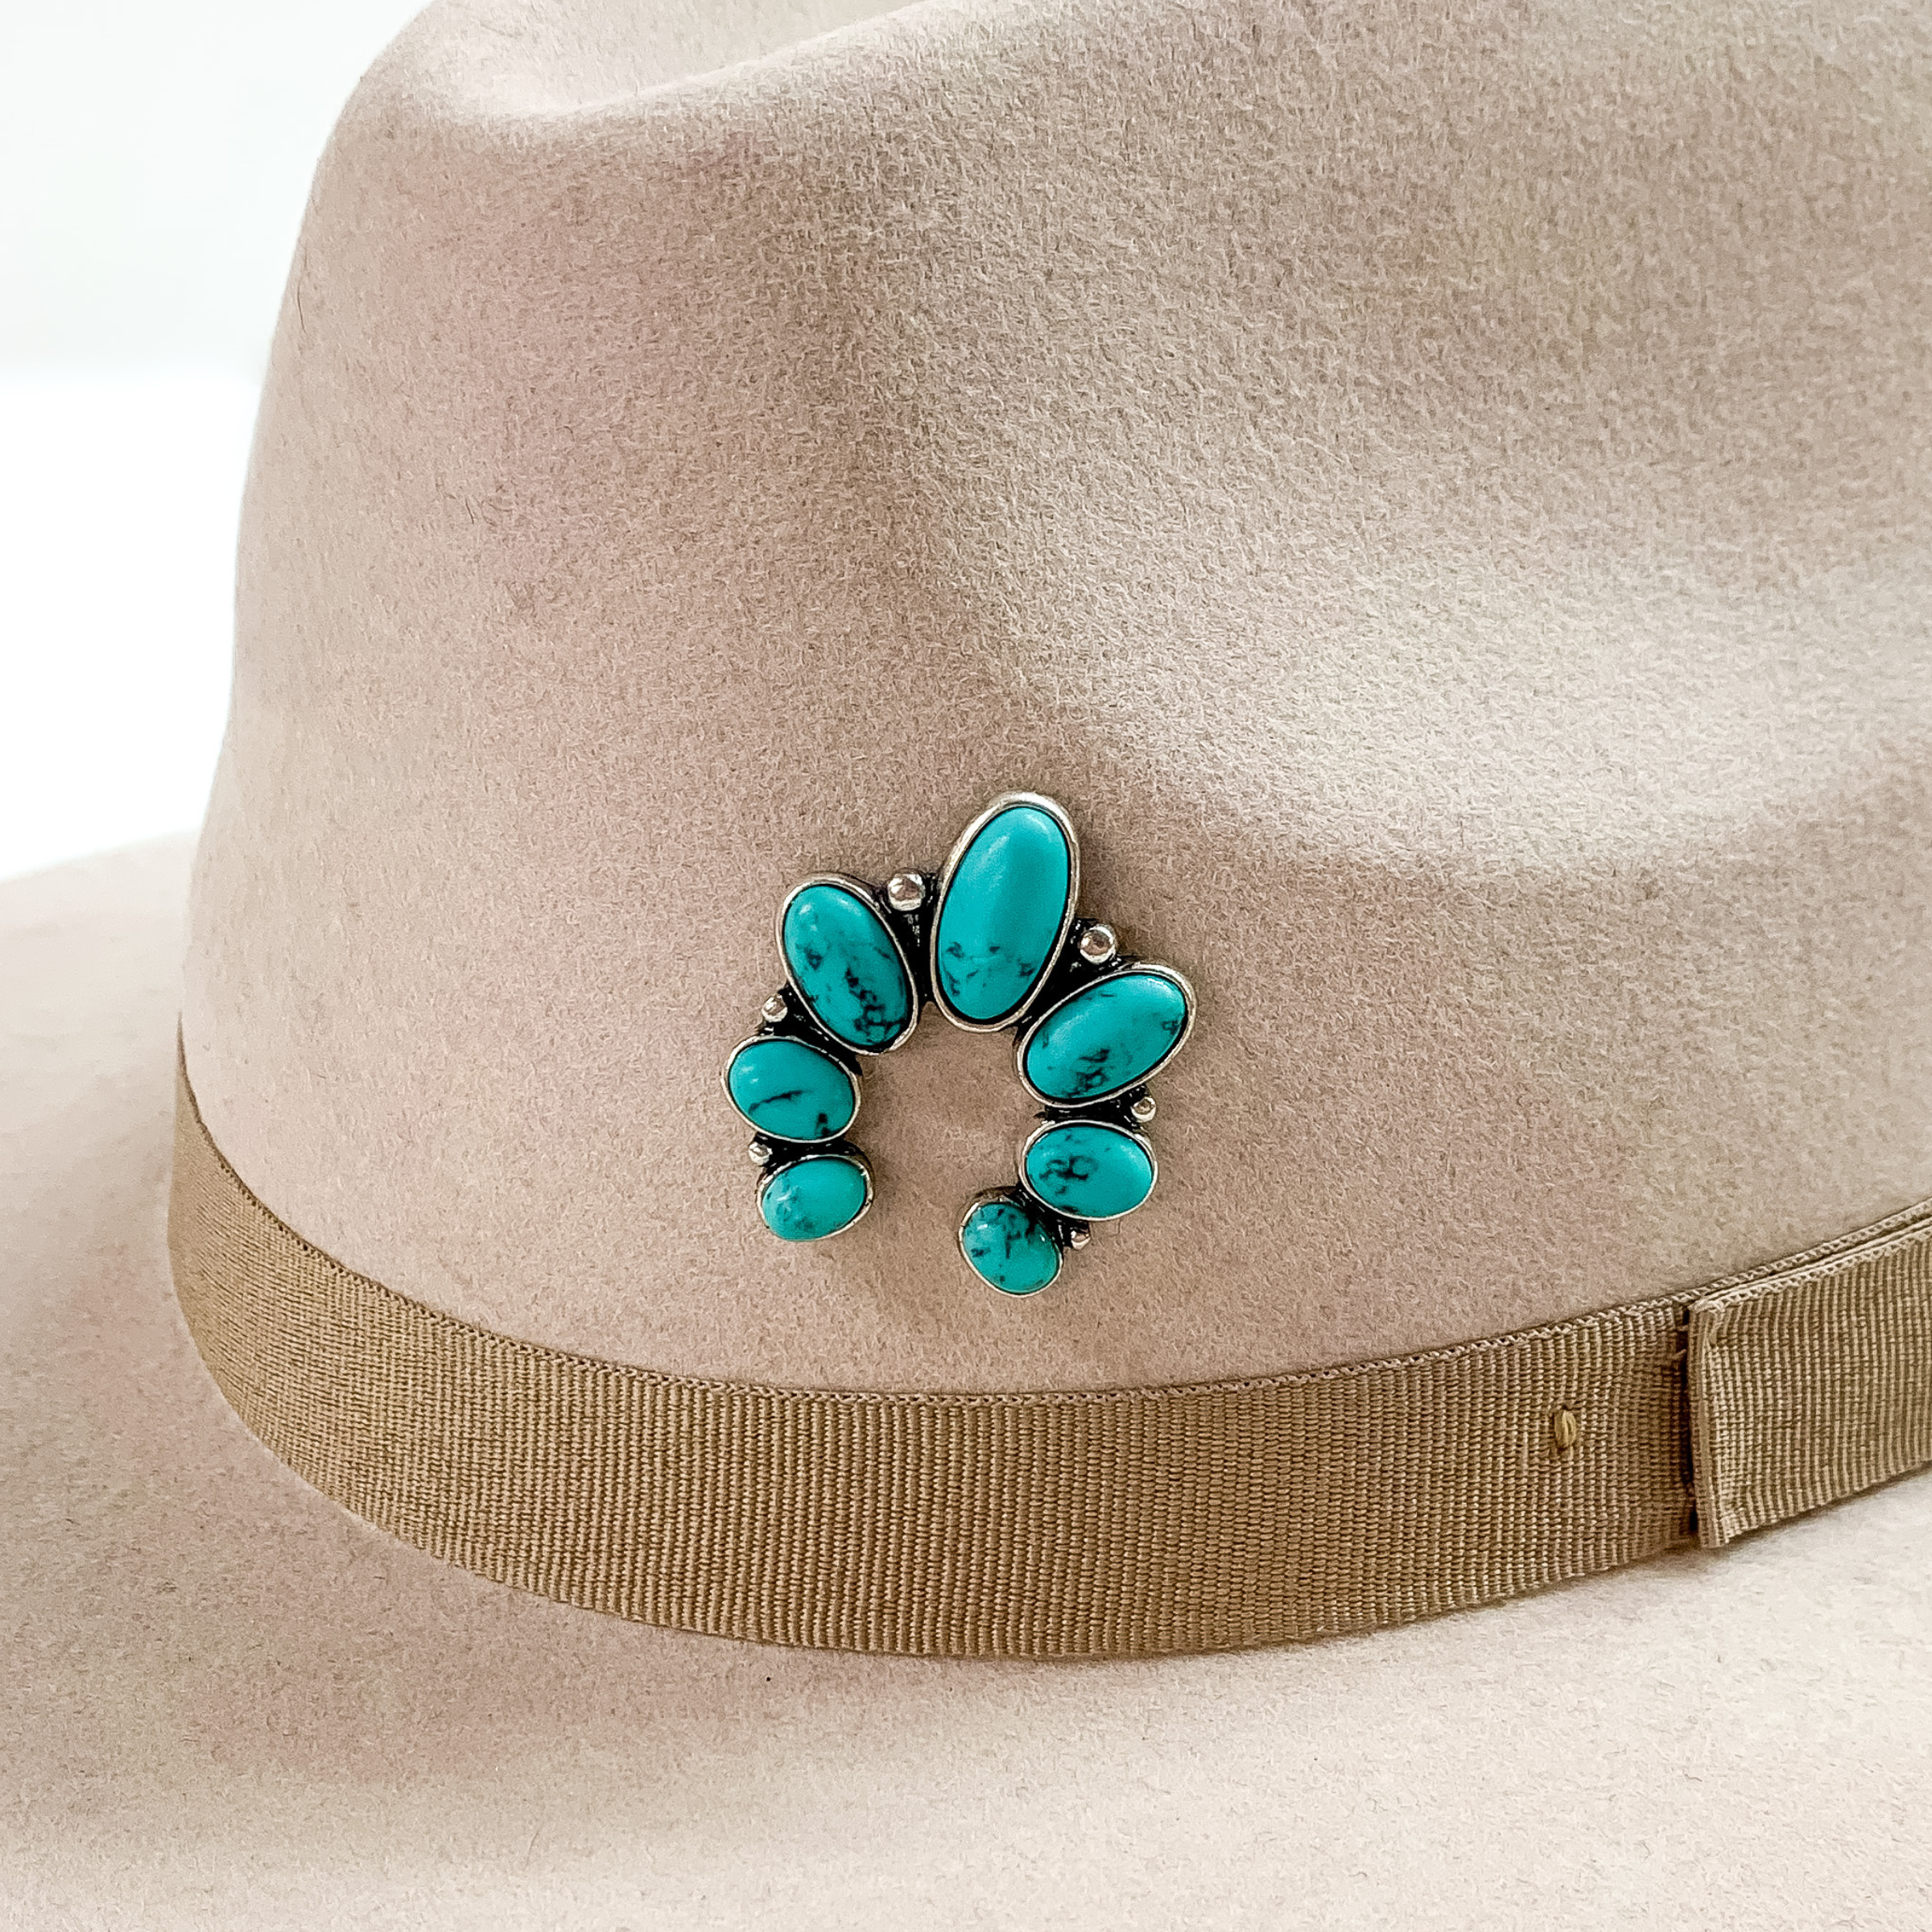 Silver naja hat pin with turquoise stones pictured on a beige colored hat pictured on a white background.